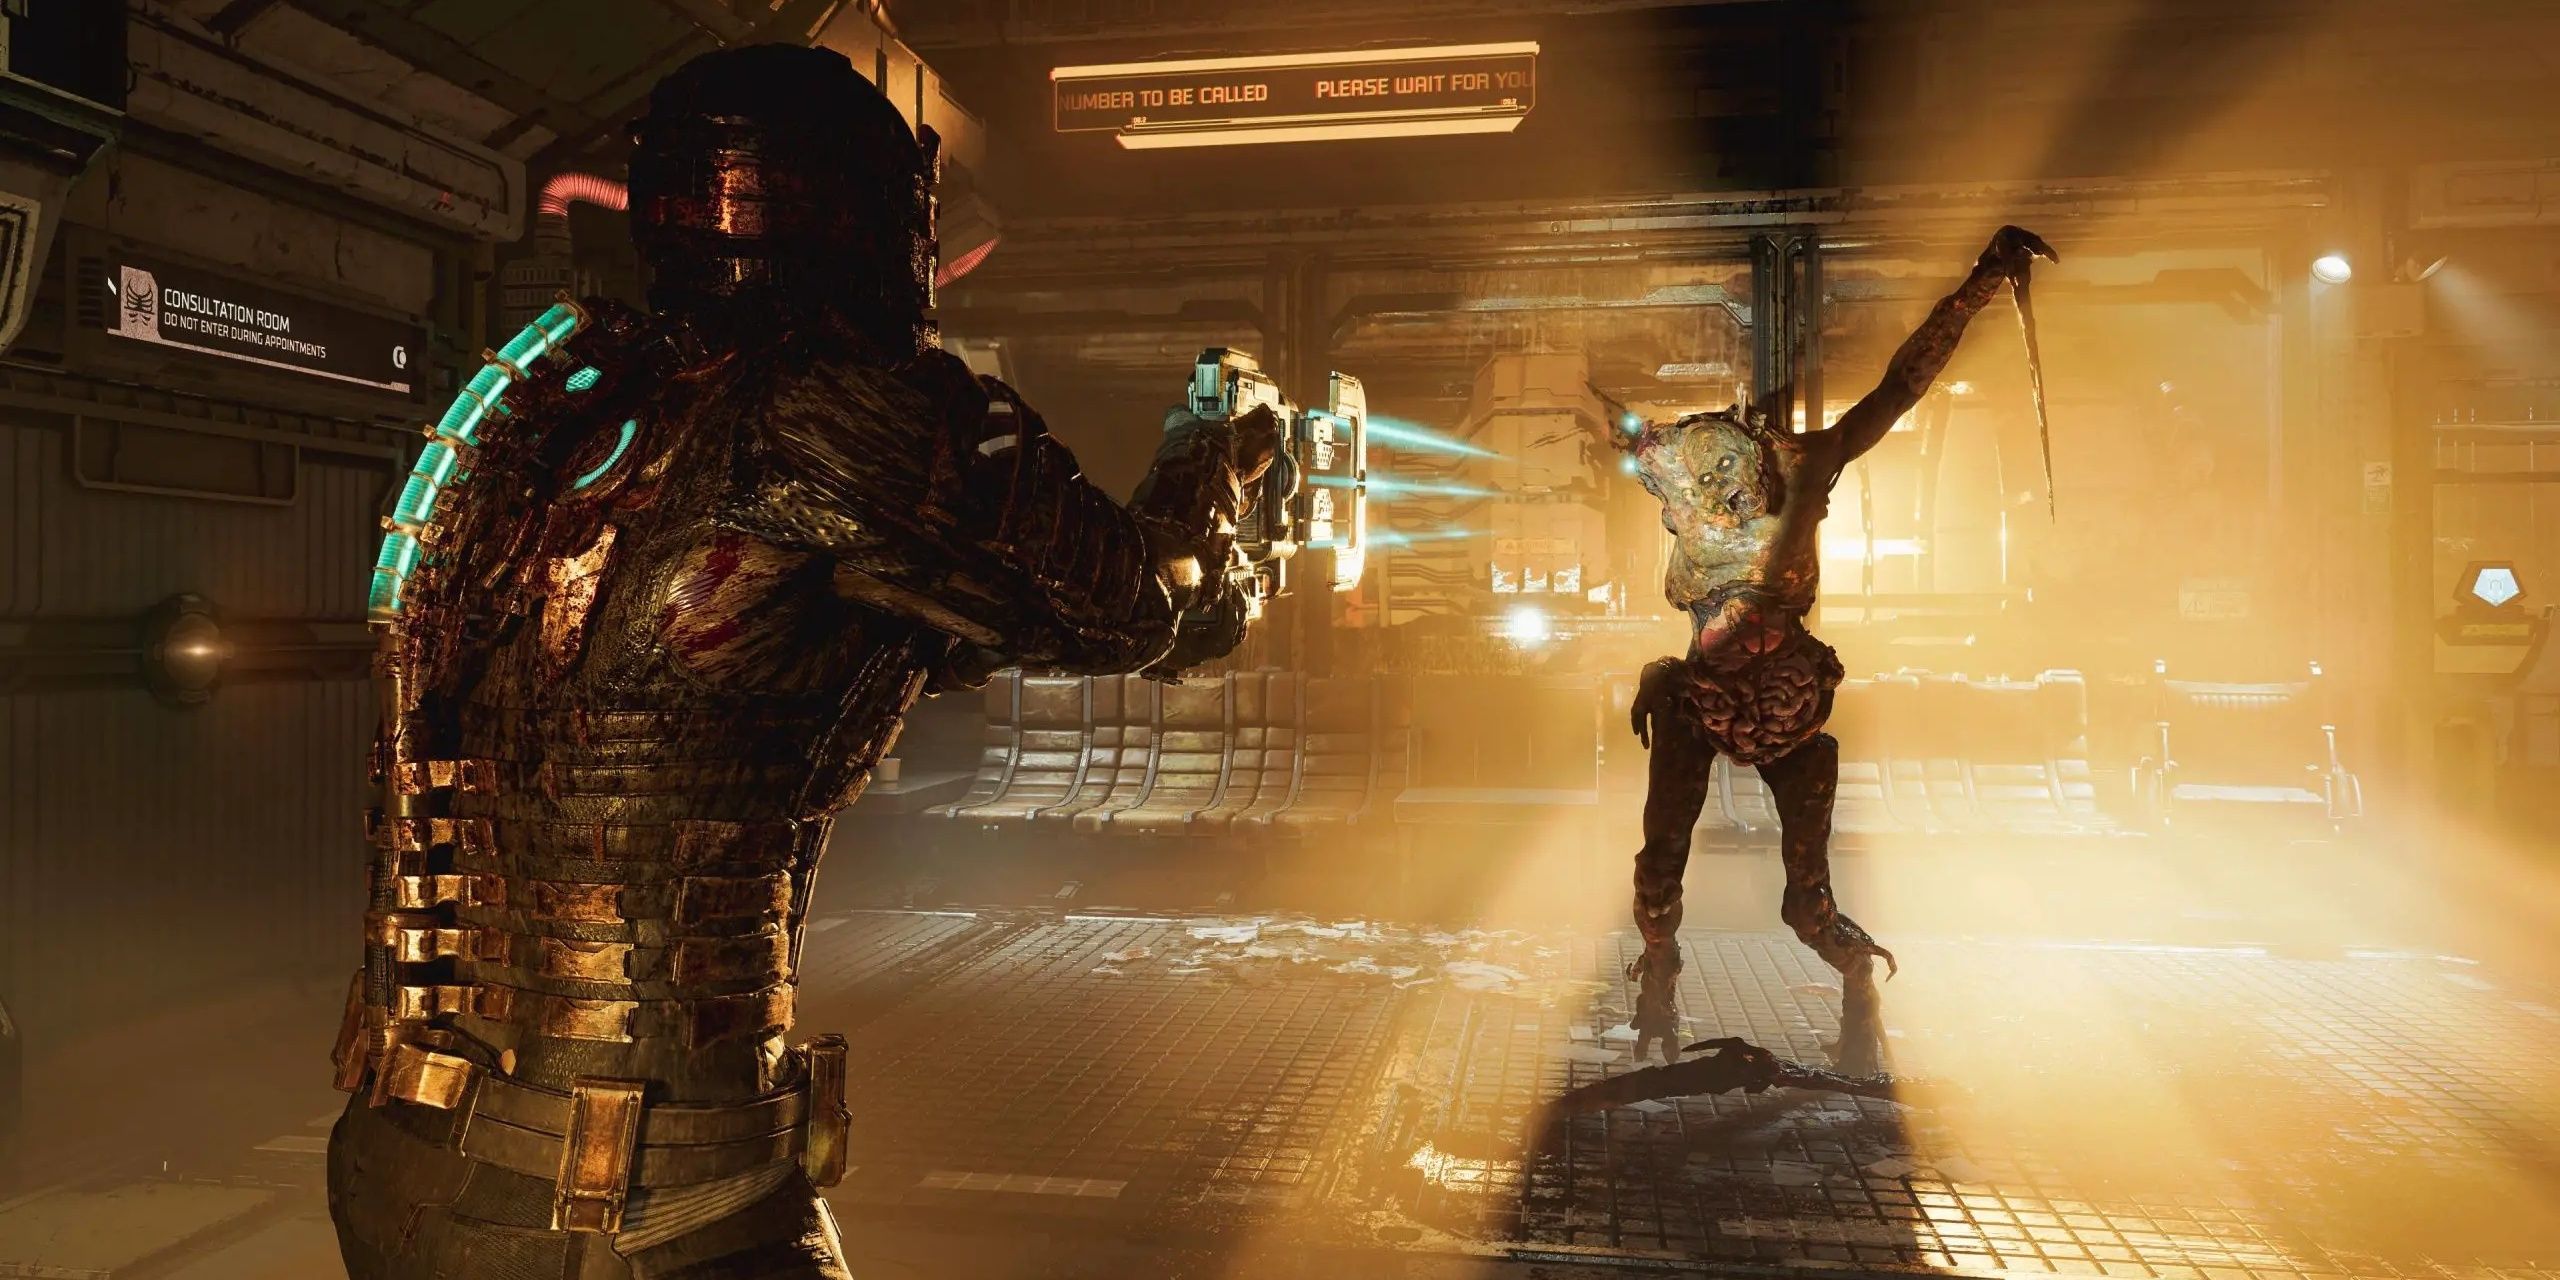 Isaac shooting a necromorph in Dead Space